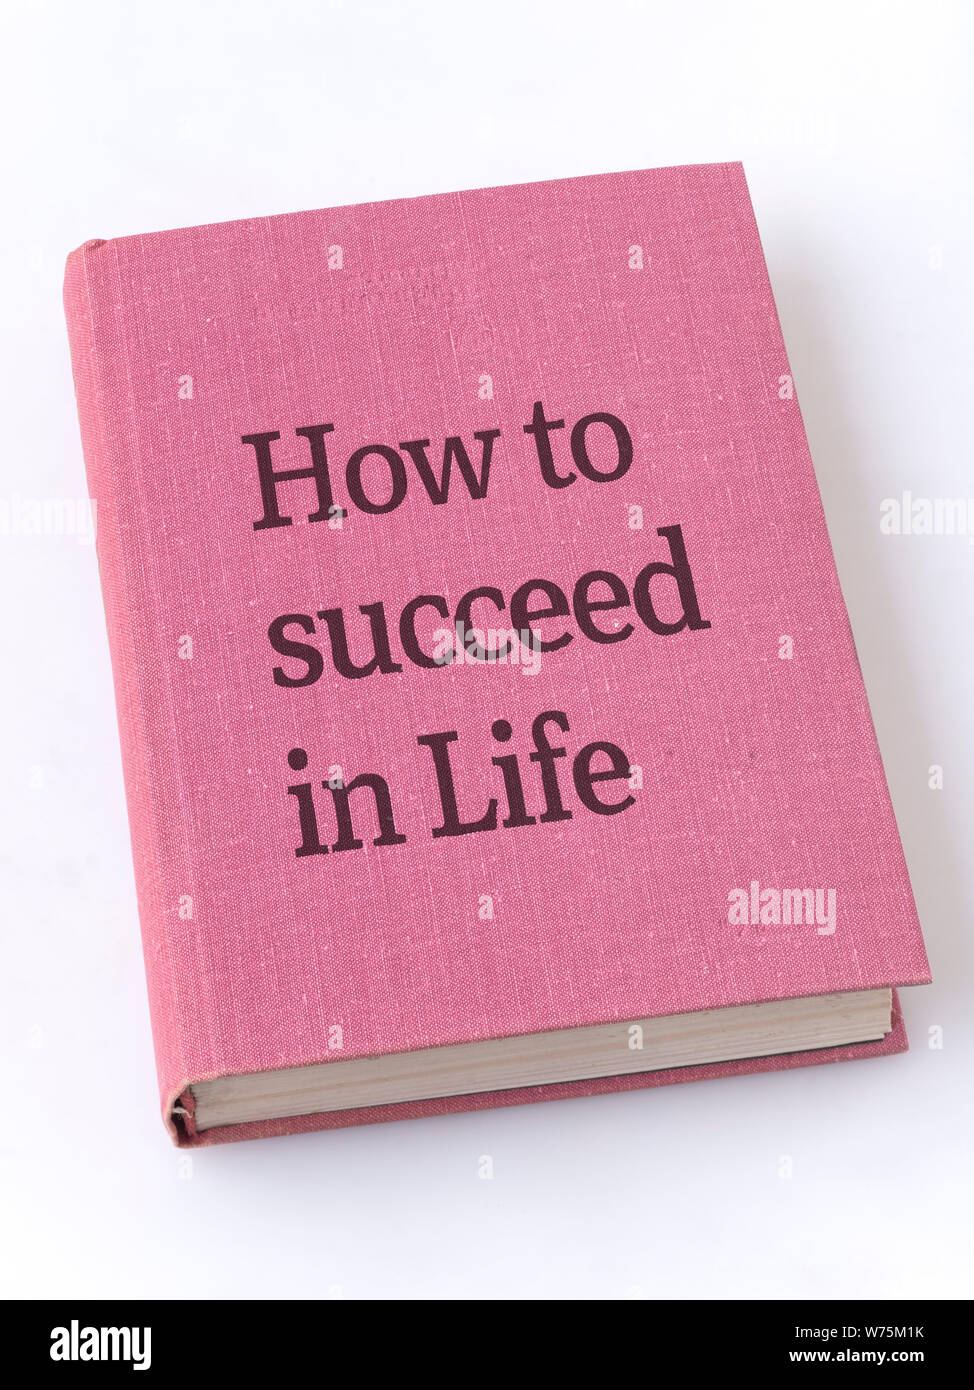 how to succeed in life phrase printed on textile book cover Stock Photo